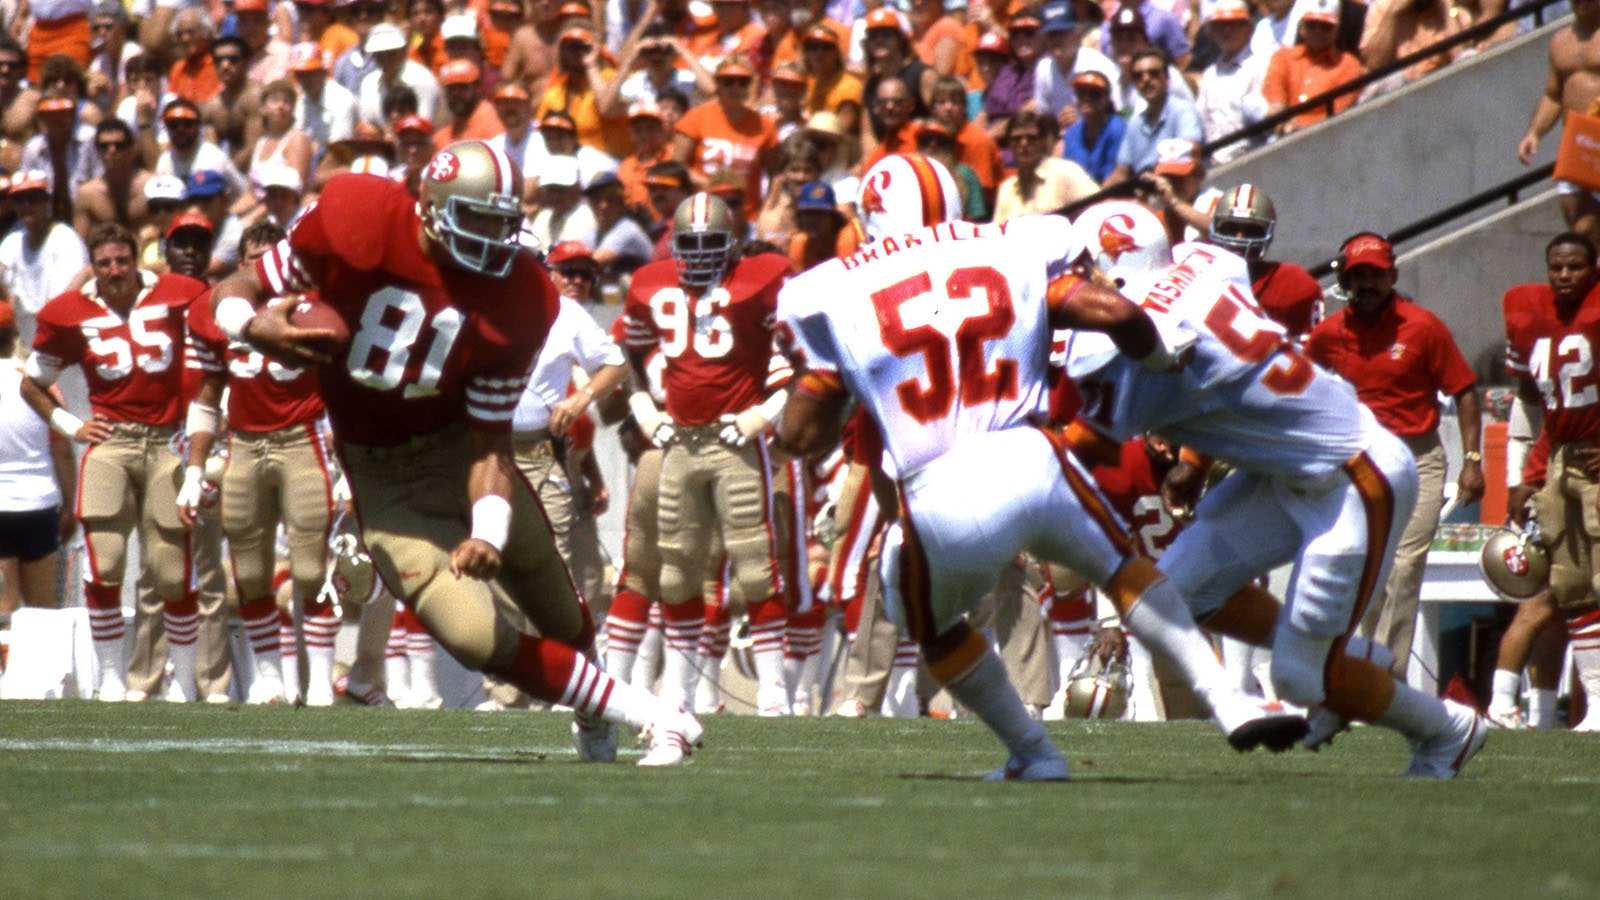 Francis of the San Francisco 49ers catches a pass during a game with the Tampa Bay Buccaneers at Tampa Stadium on Sept. 7, 1986. The 49ers won 31-7.